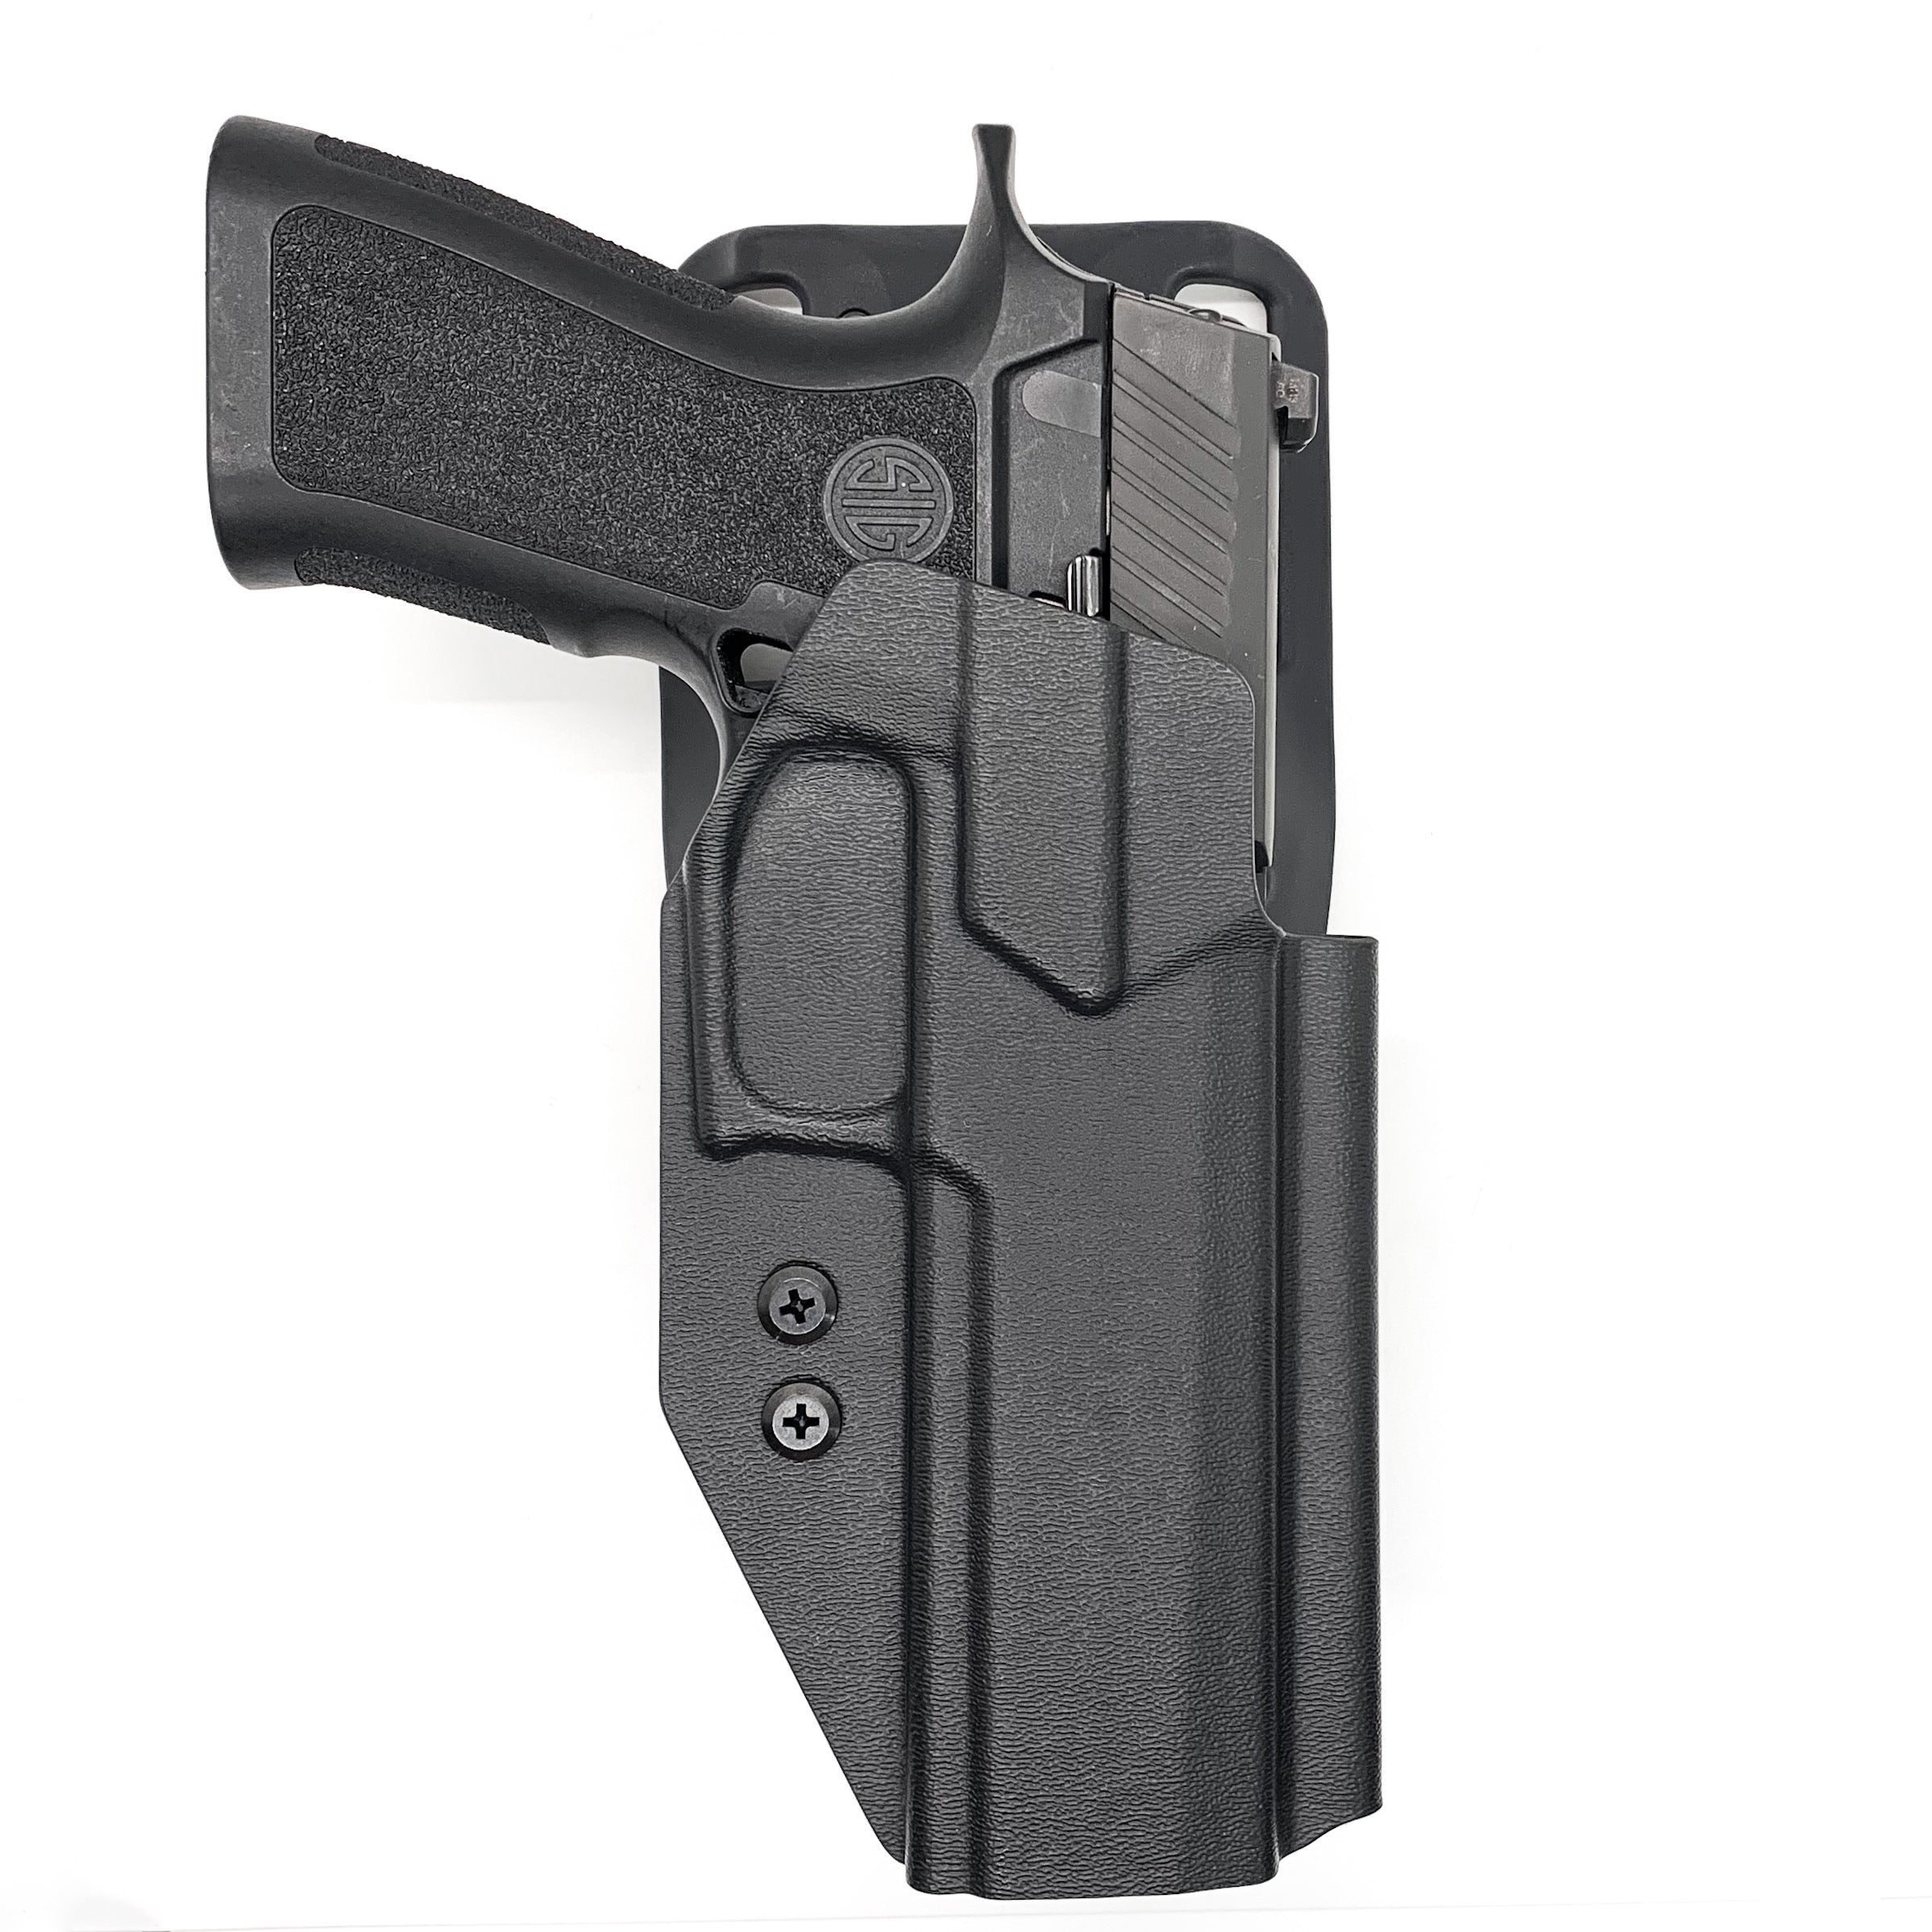 Outside waistband competition style holster designed to fit all Sig P320 pistols with GoGuns USA Gas Pedal installed. Holster will fit the Compact, Carry, M17, M18 and X5 line of P320 pistols. Adjustable retention. Holster works well for USPSA, 3-Gun, Steel Challenge and other competition shooting sports 